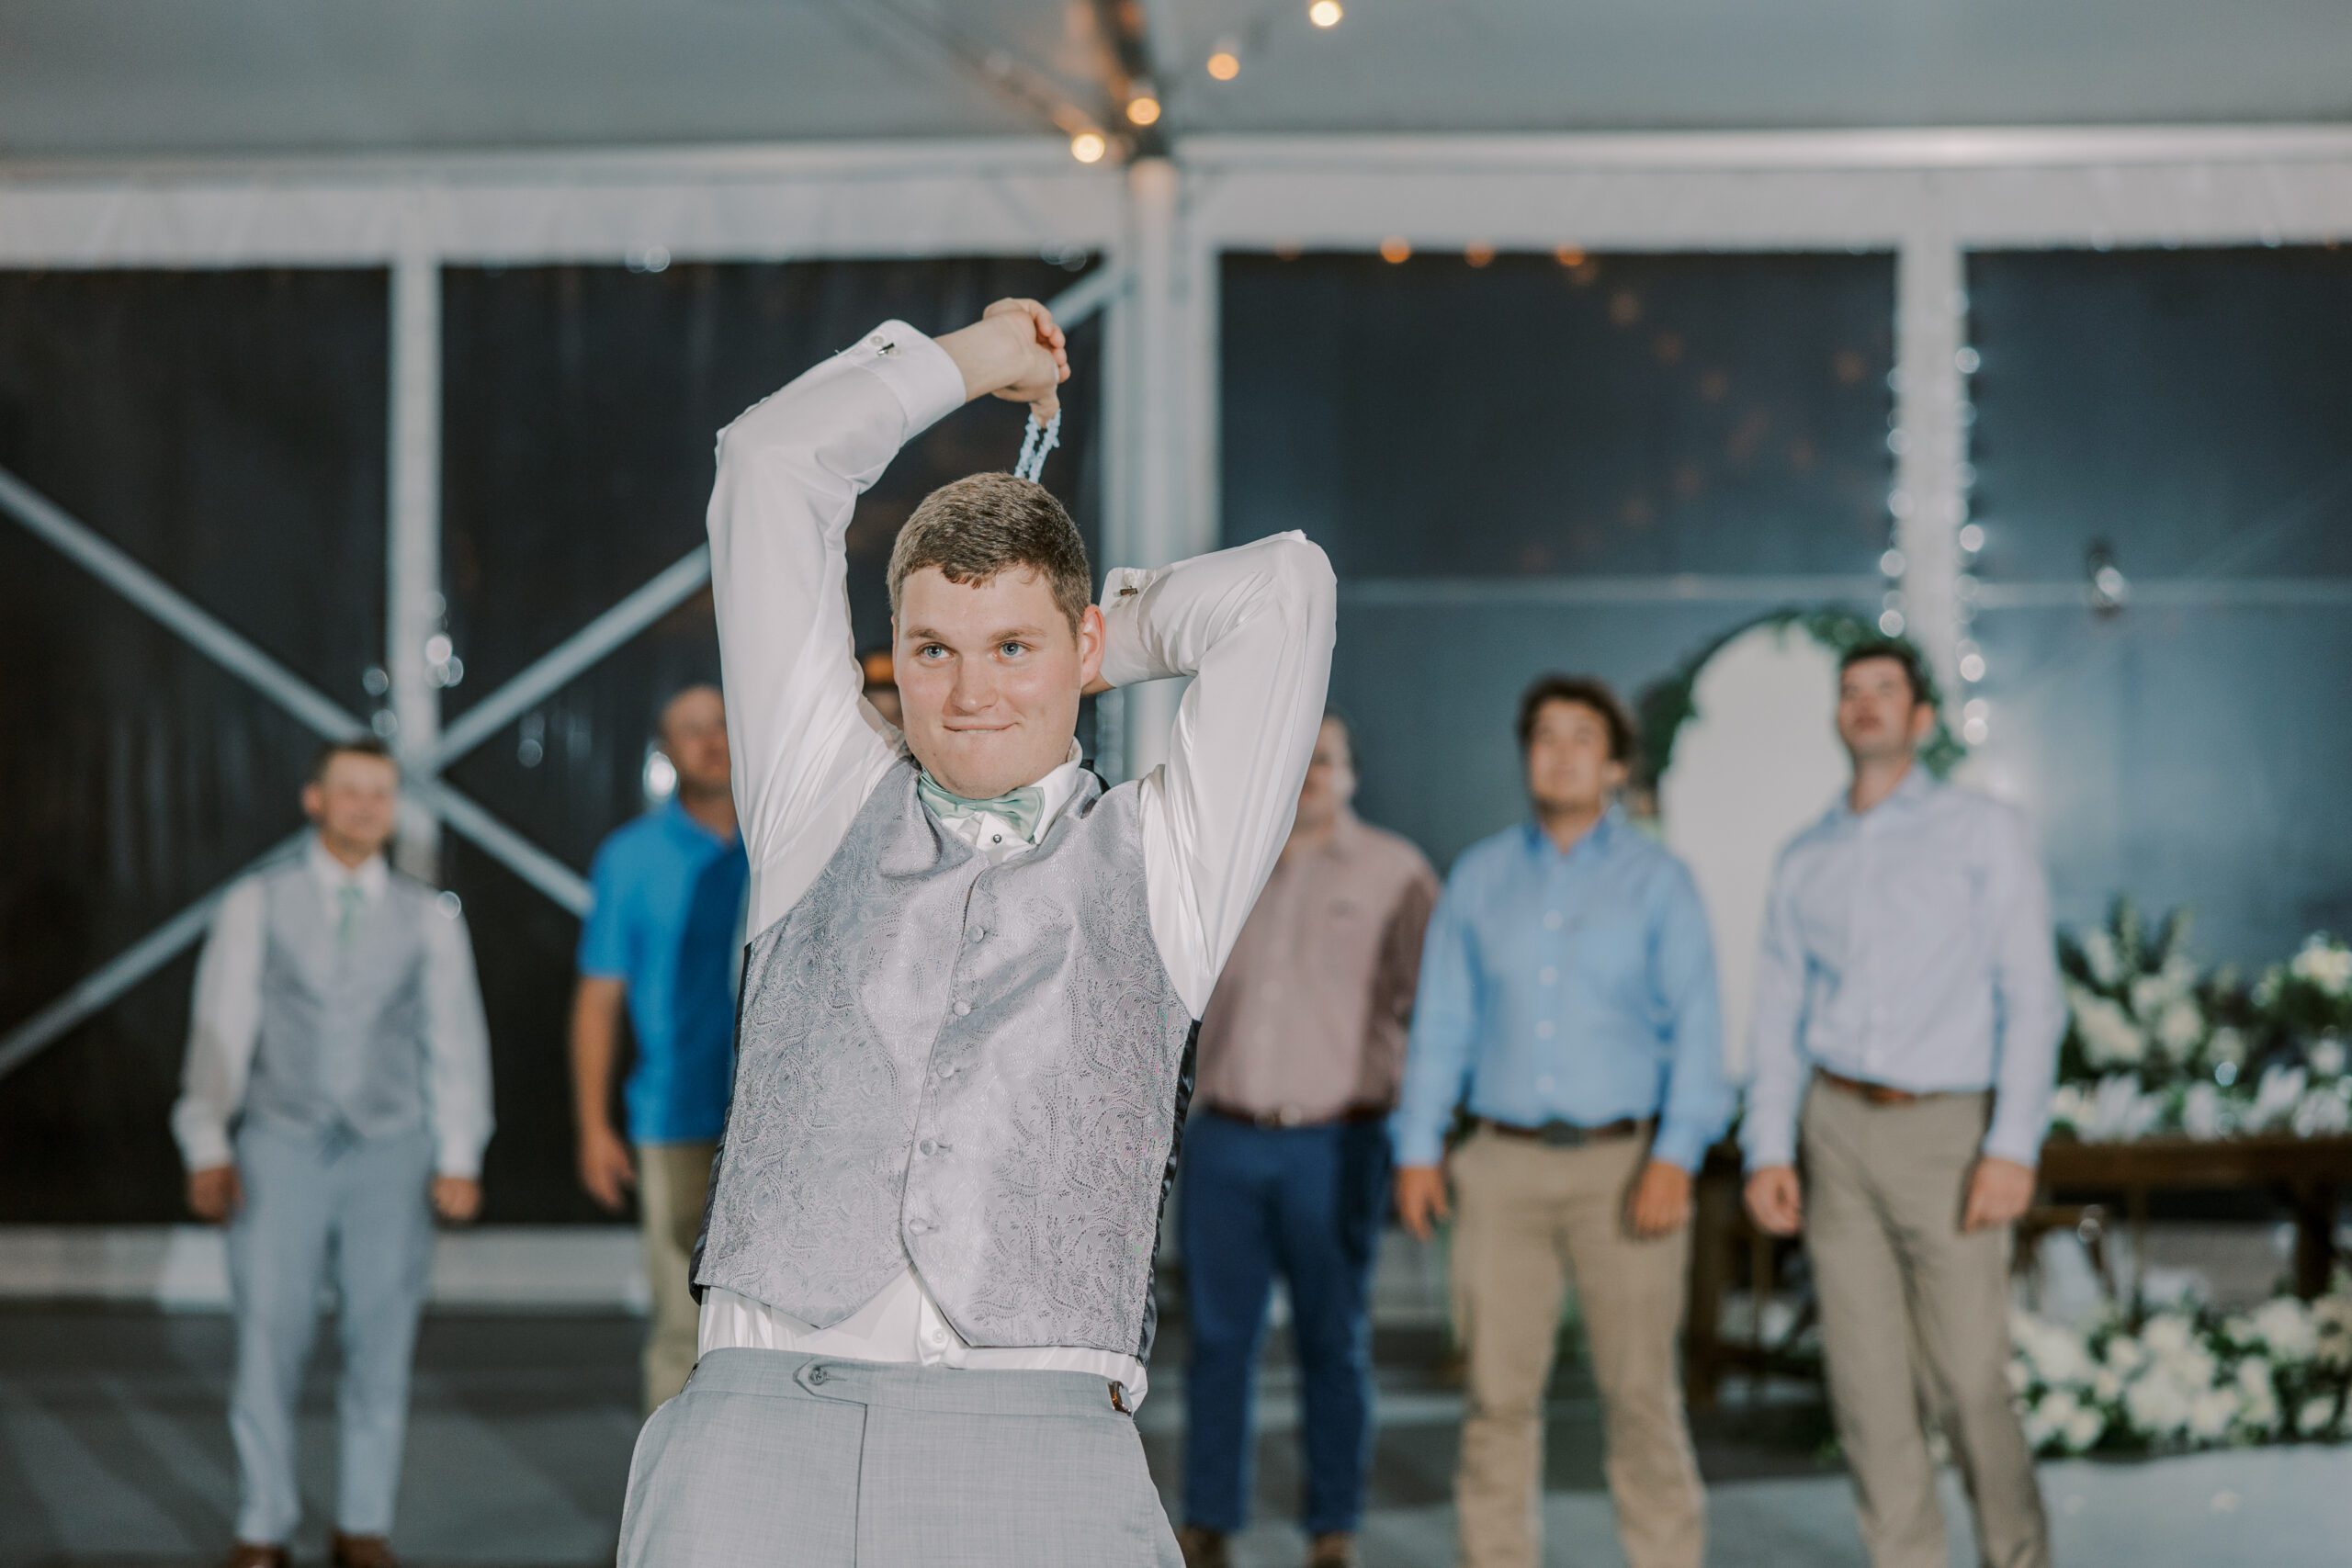 Groom in focus getting ready to toss the garter behind him, as groomsmen and male guests can be seen standing behind him